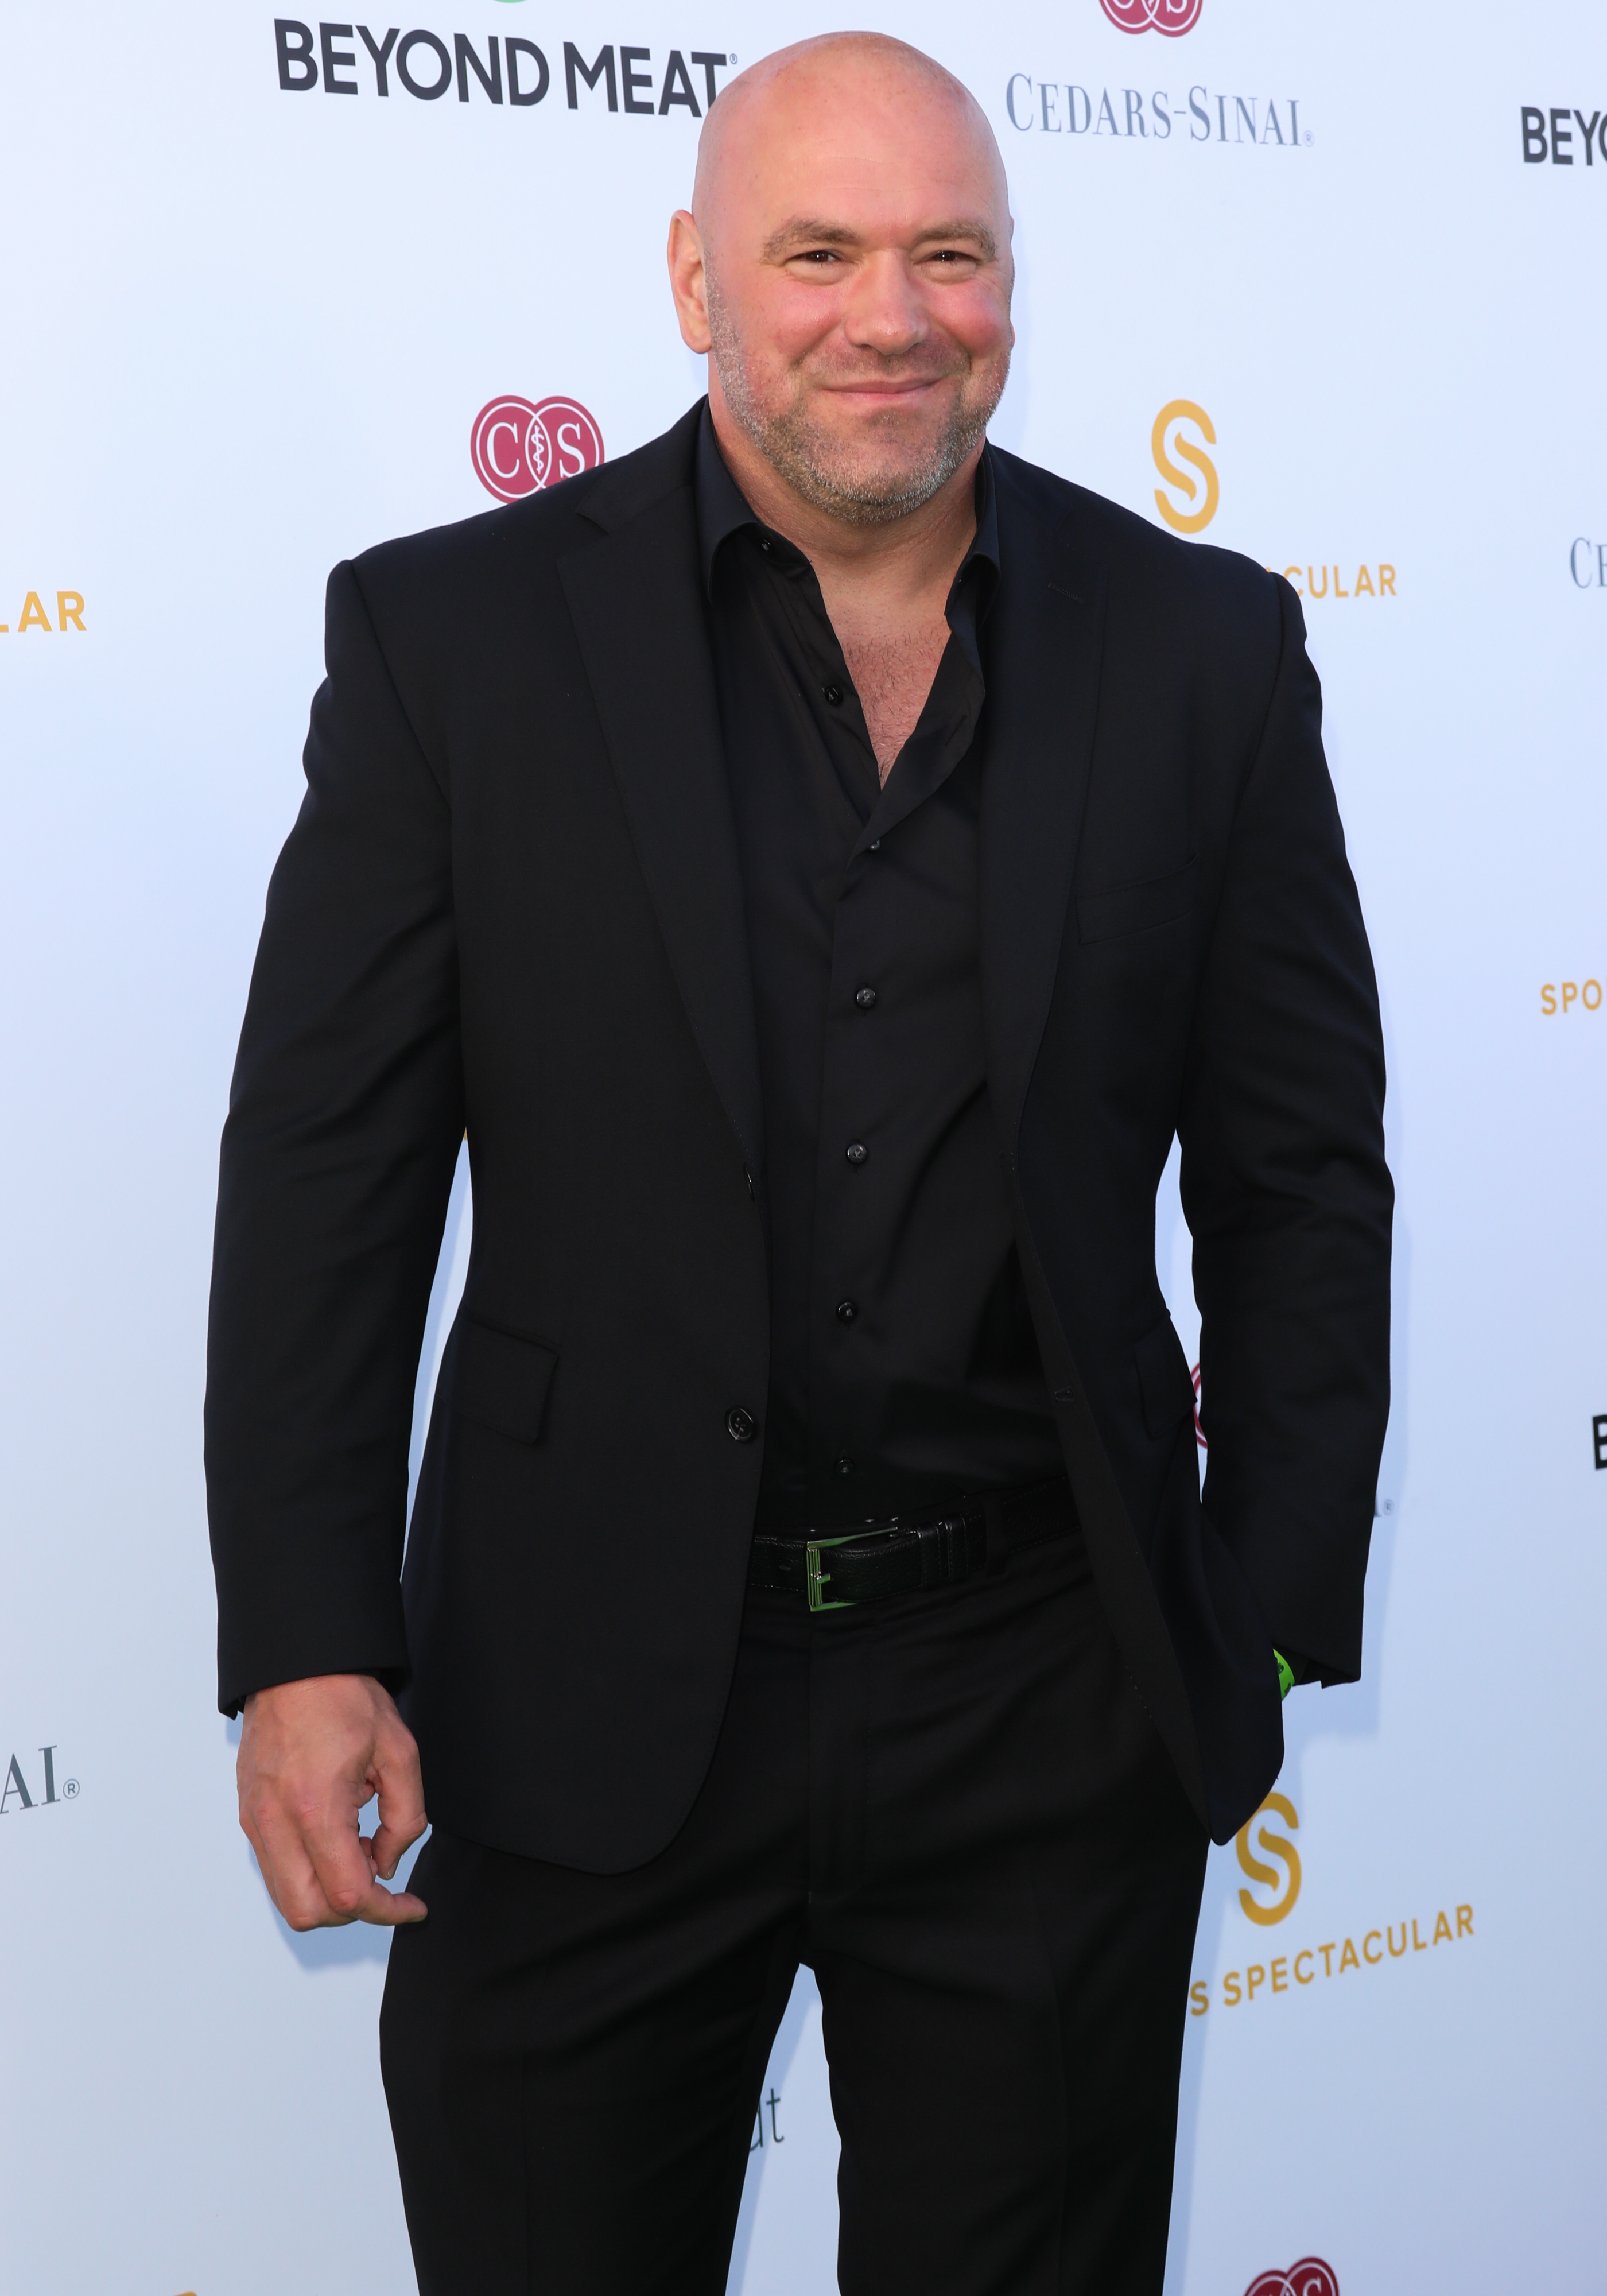 Dana White attends the 34th Annual Cedars-Sinai Sports Spectacular celebration at The Compound on July 15, 2019, in Inglewood, California | Source: Getty Images